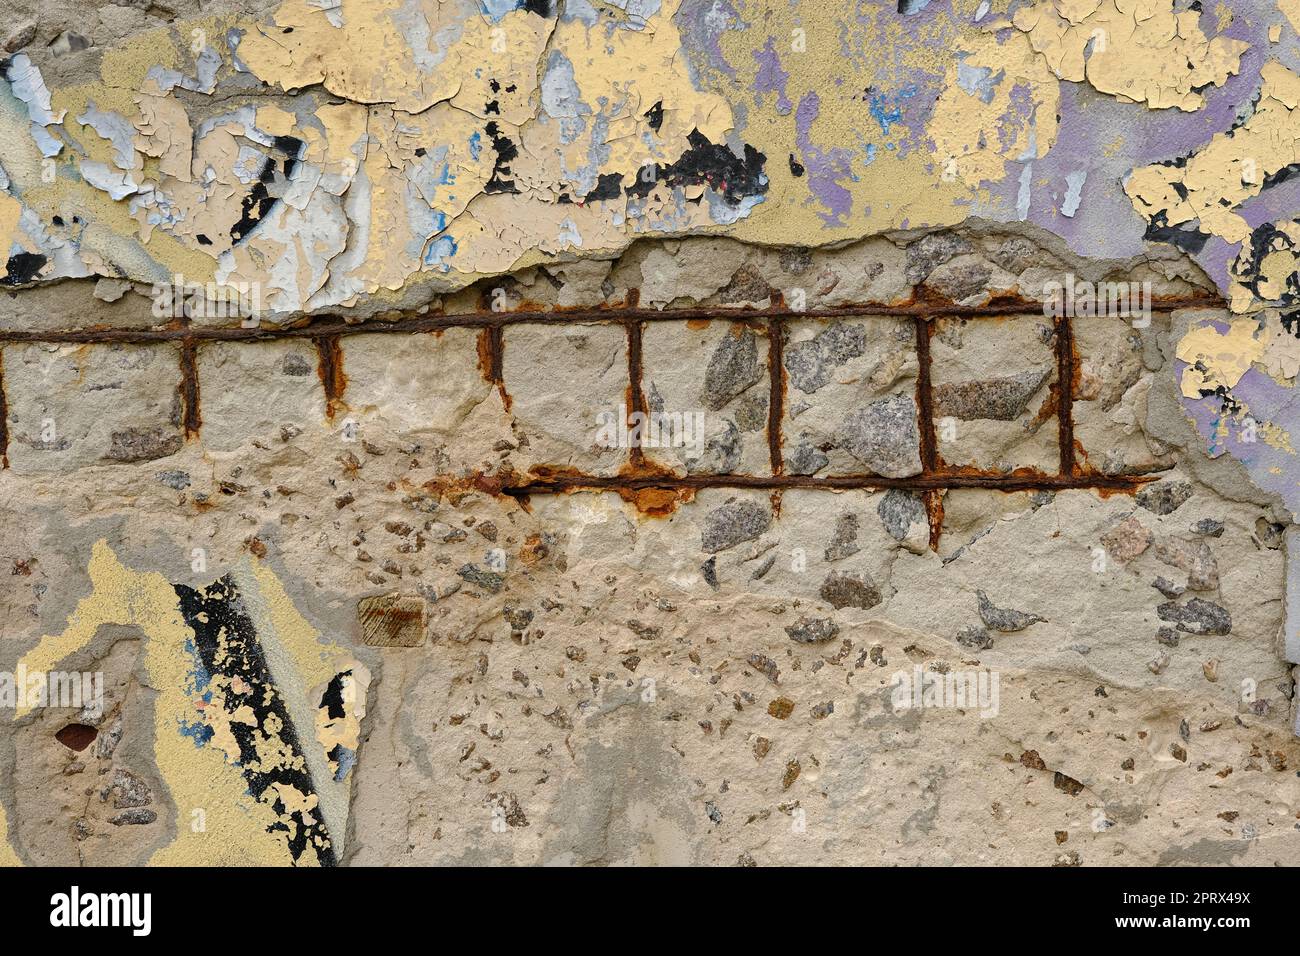 Old reinforced concrete structure with damaged and rusty metallic reinforcement that must be demolished - Metal bars rusty due to water infiltration into concrete Stock Photo